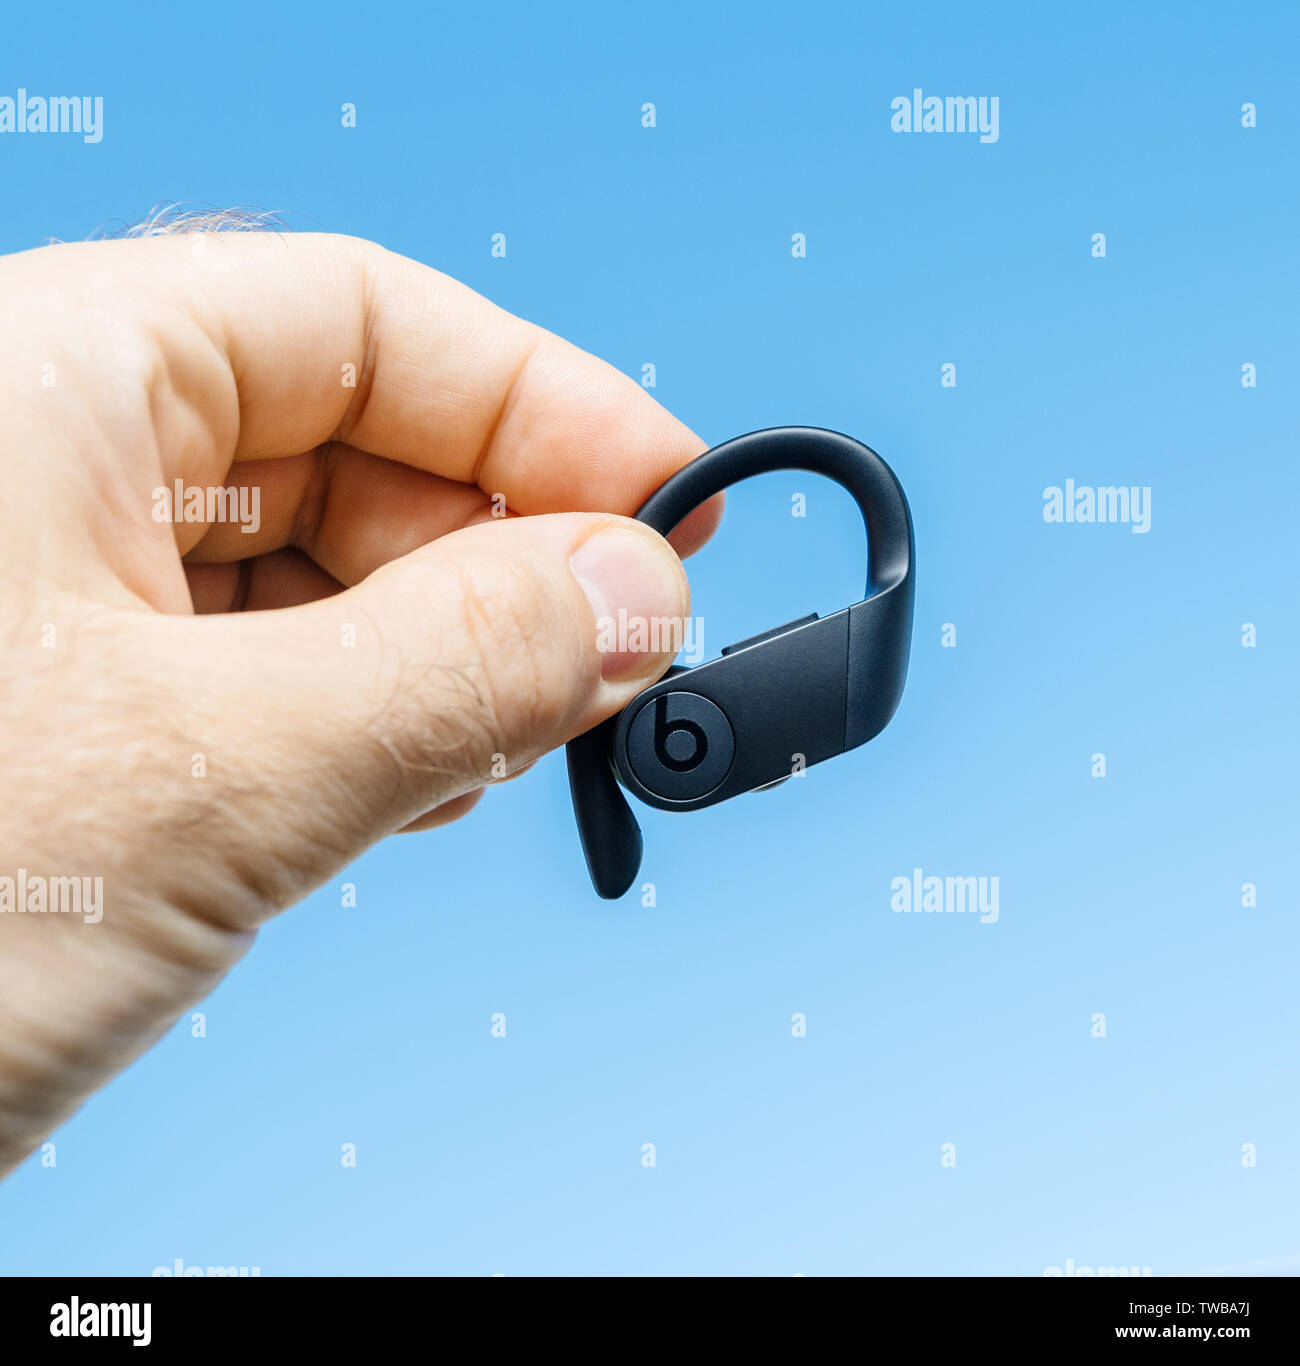 Paris, France - Jun 17, 2019: Close-up of man hand holding demonstrating new Powerbeats Pro Beats by Dr Dre wireless high-performance earphone with integrated Siri - blue sky square image Stock Photo